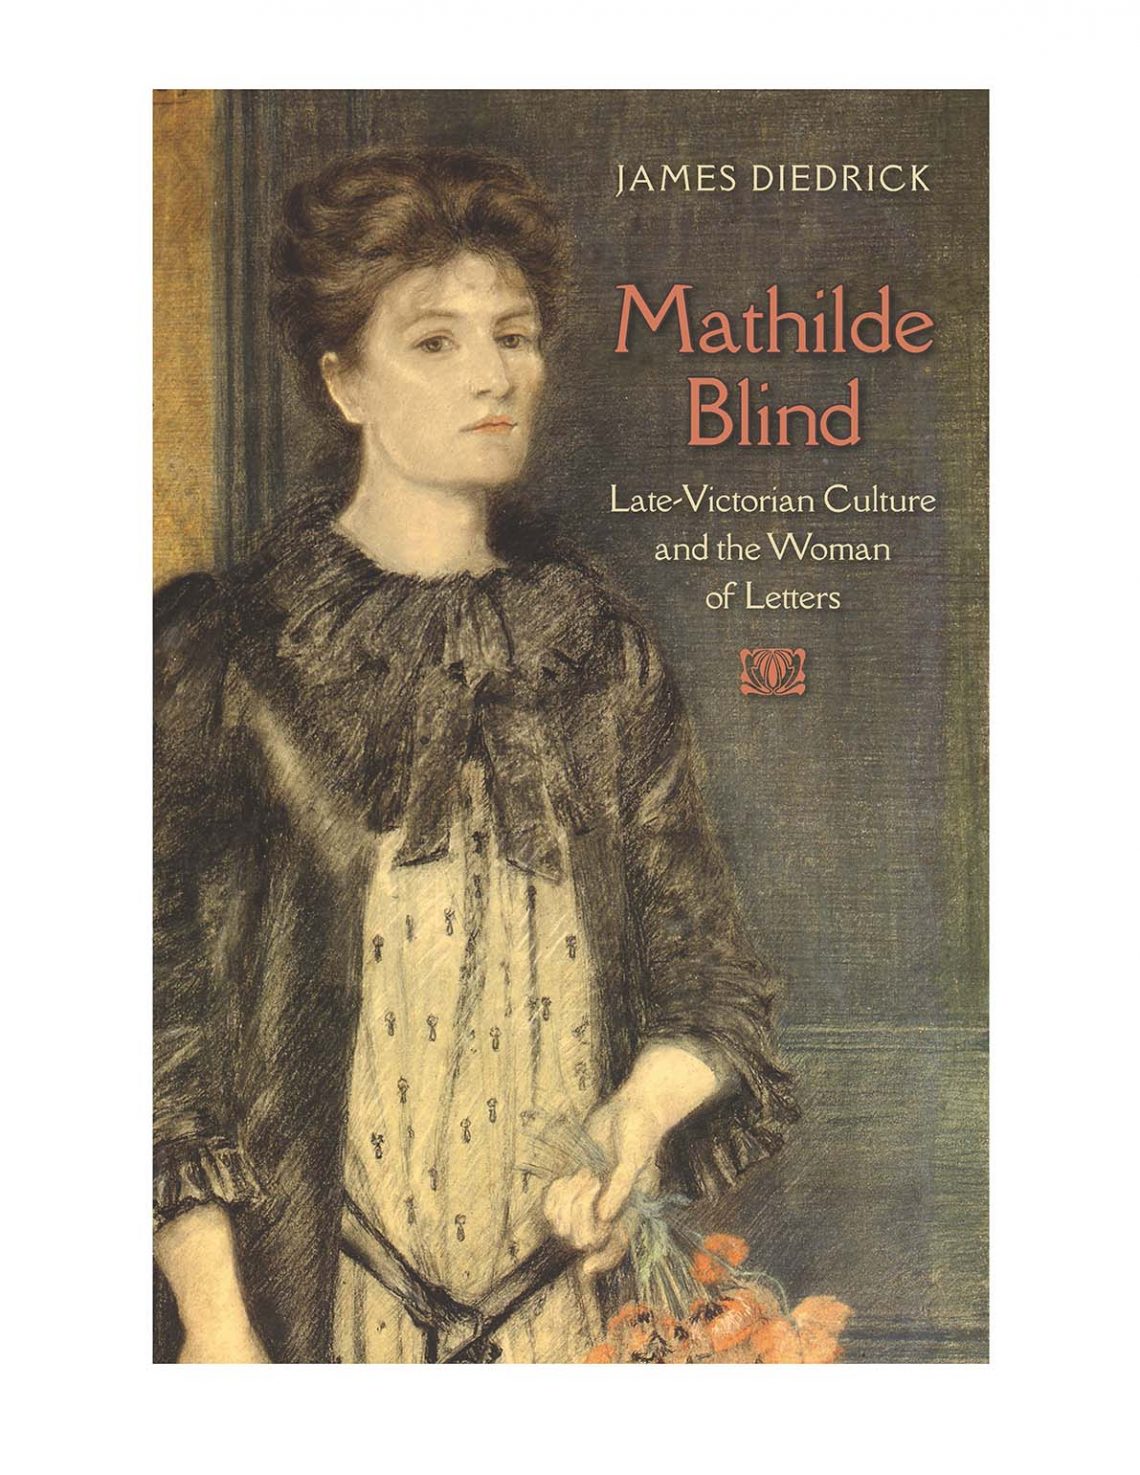 Susan David Bernstein reviews Mathilde Blind: Late-Victorian Culture and the Woman of Letters